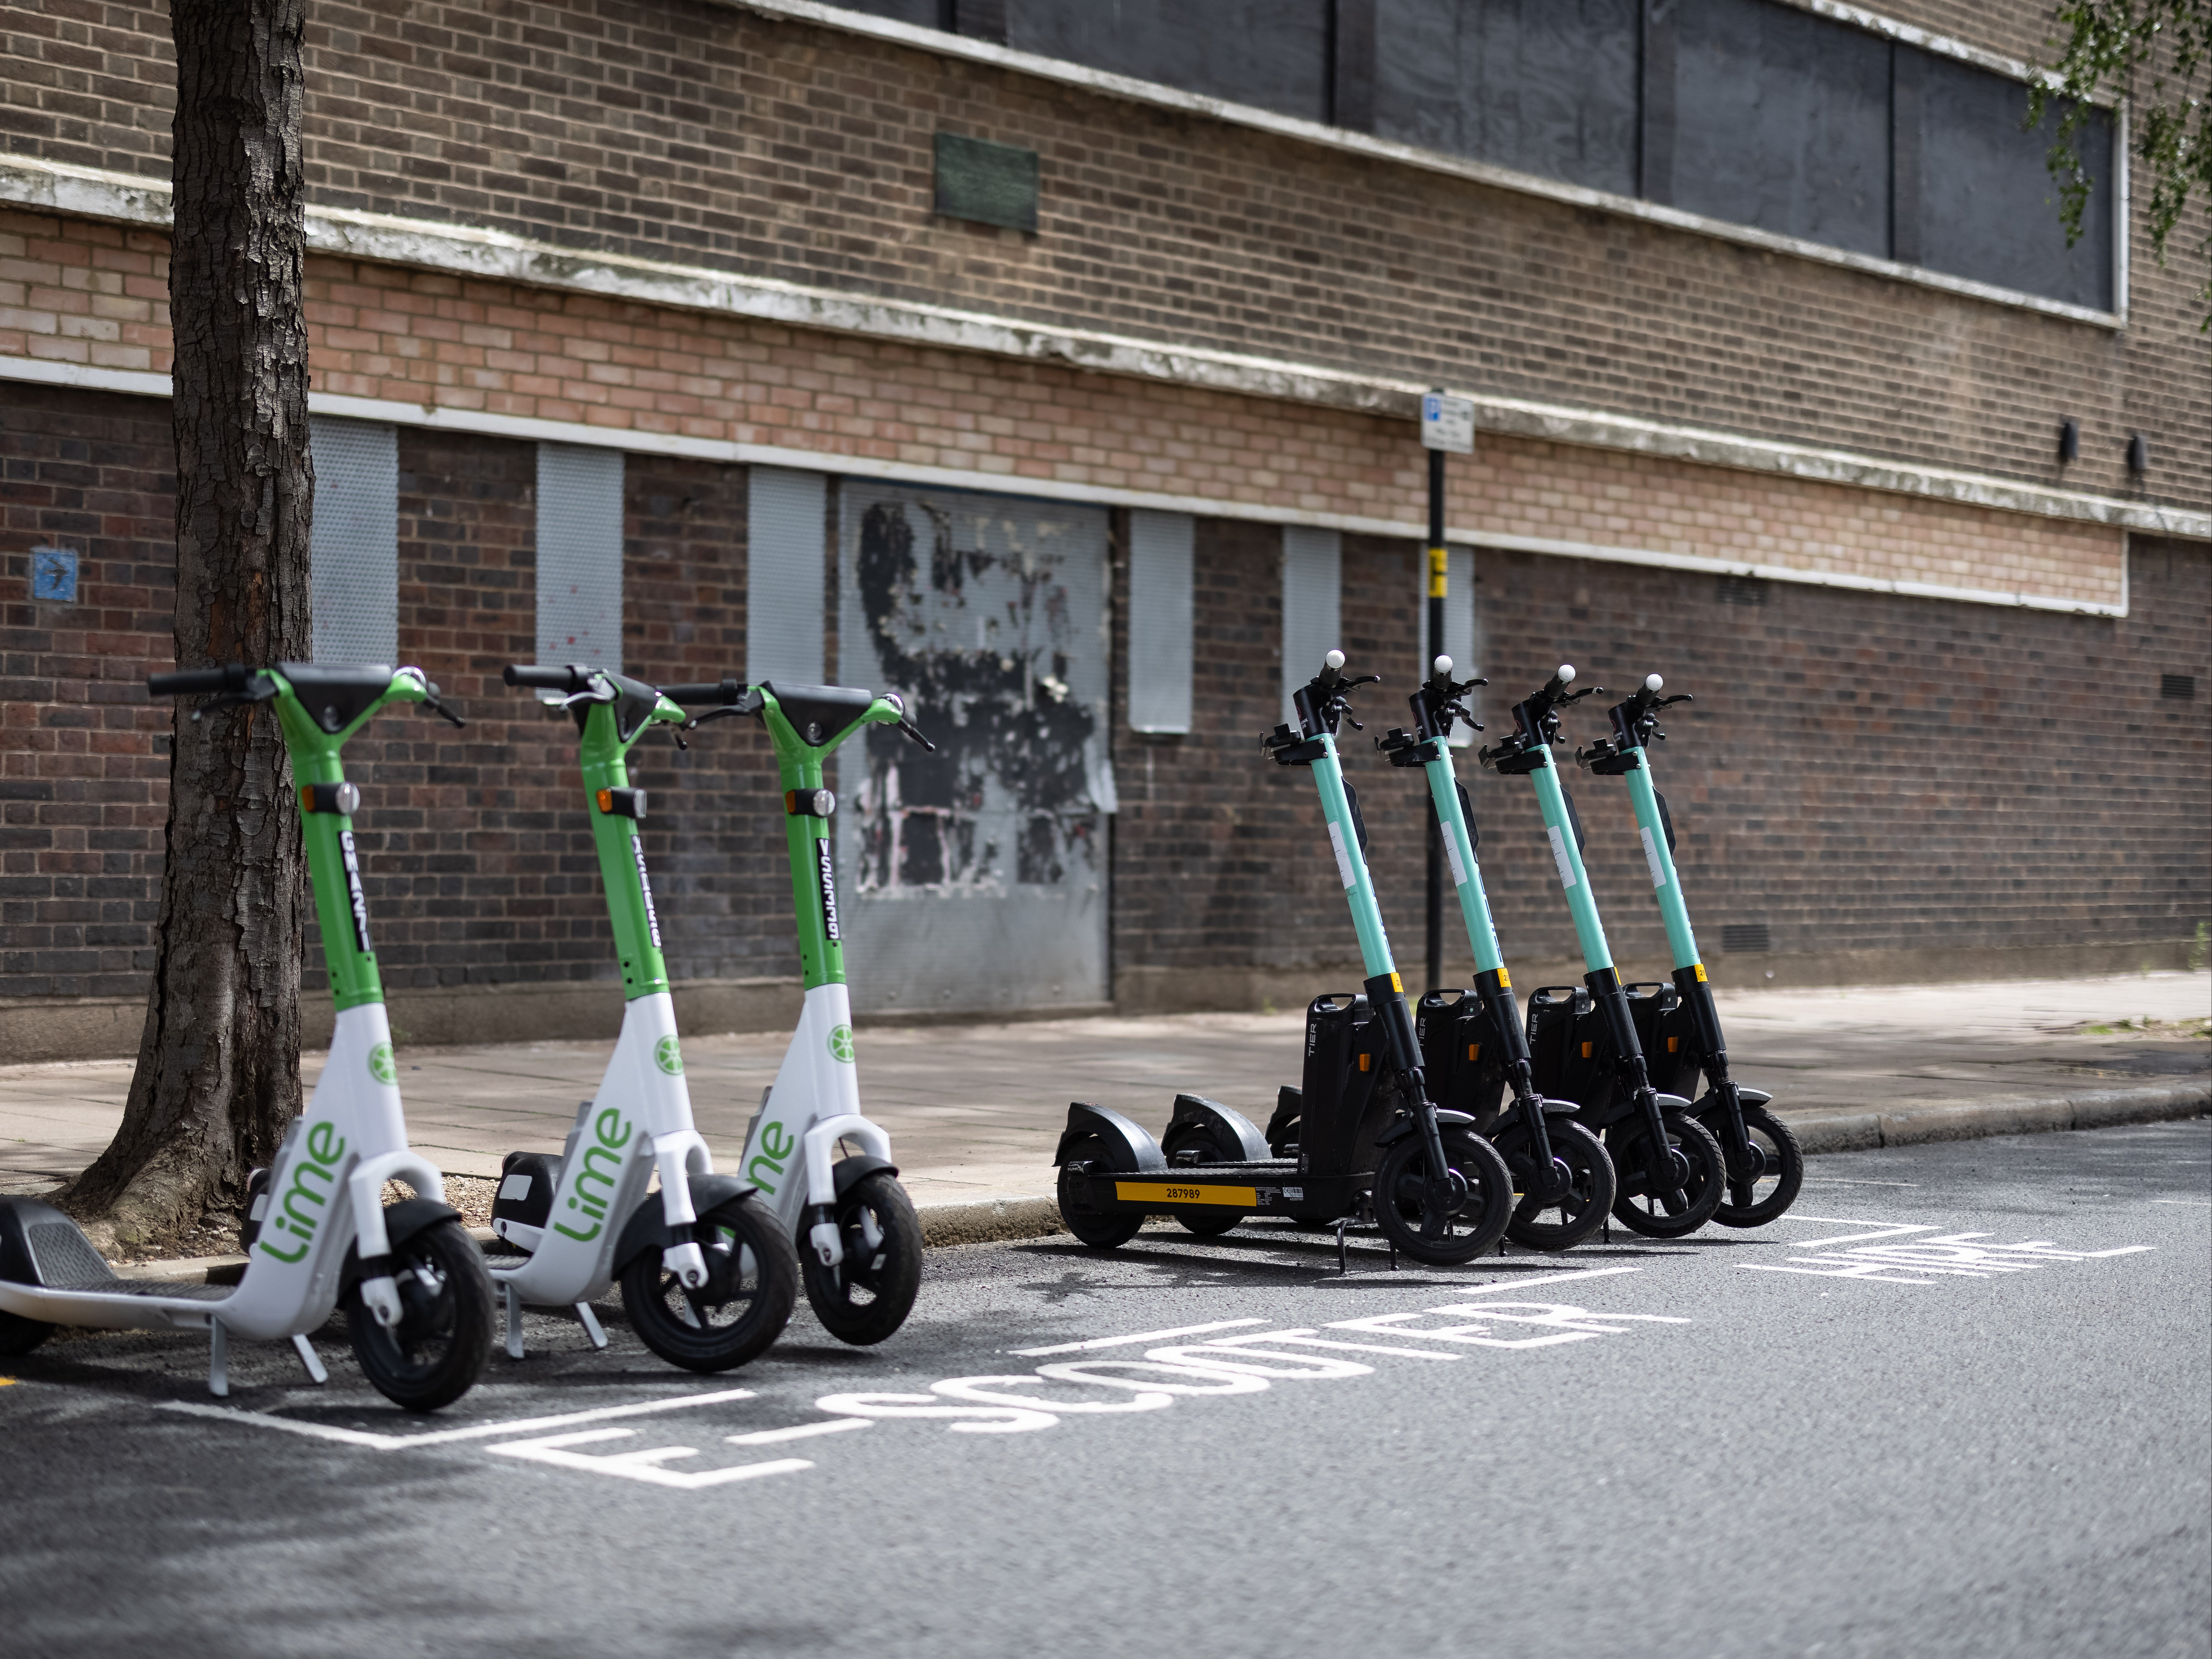 A row of both Lime (L) and Tier (R) electric scooters are seen in a parking bay on July 05, 2021 in London, England.